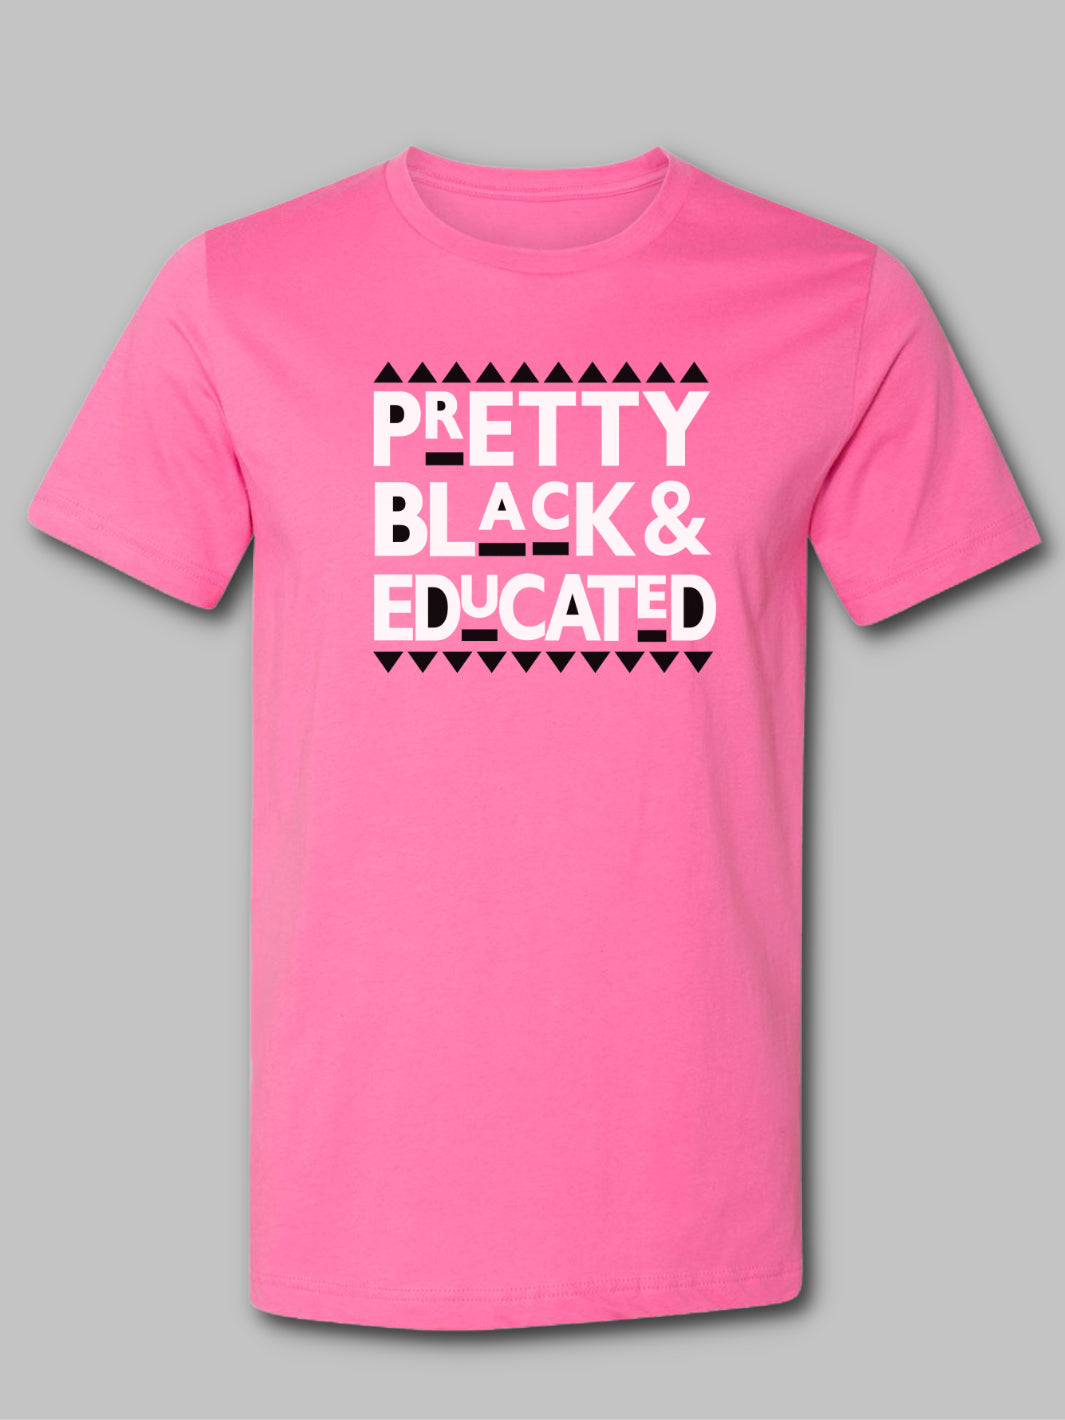 Hot Pink Cotton T-Shirt, featuring the phrase 'Pretty, Black, and Educated' in bold BLACK AND WHITE  lettering across the front. The font is Bold letters, emphasizing a message of empowerment and pride.